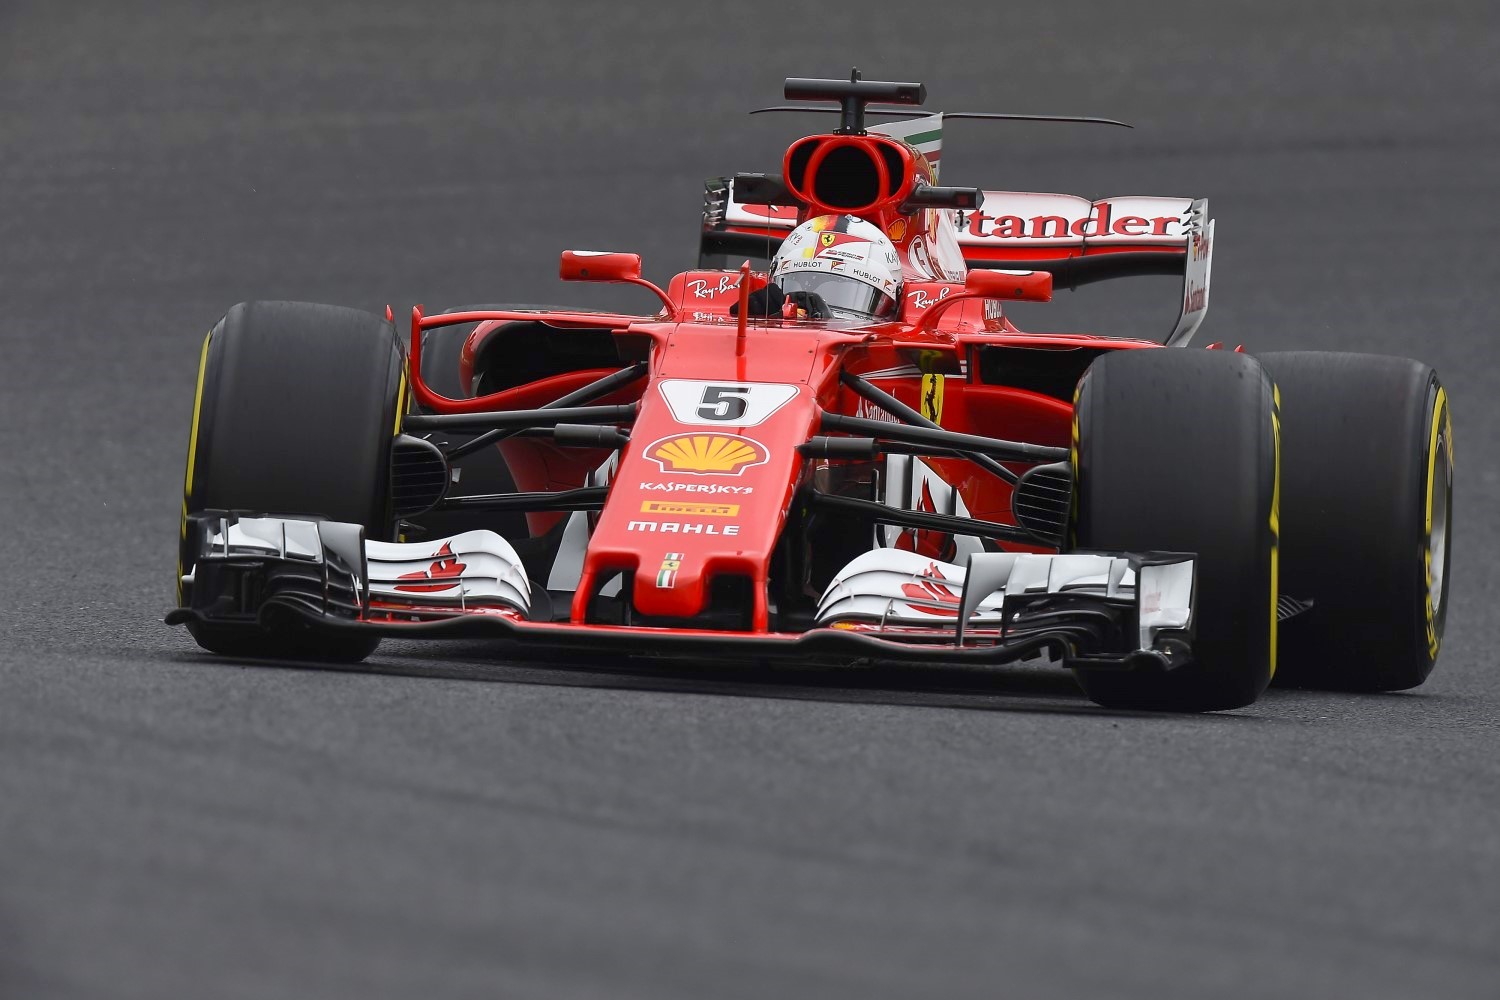 Vettel knows his Ferrari cannot beat the Mercedes here